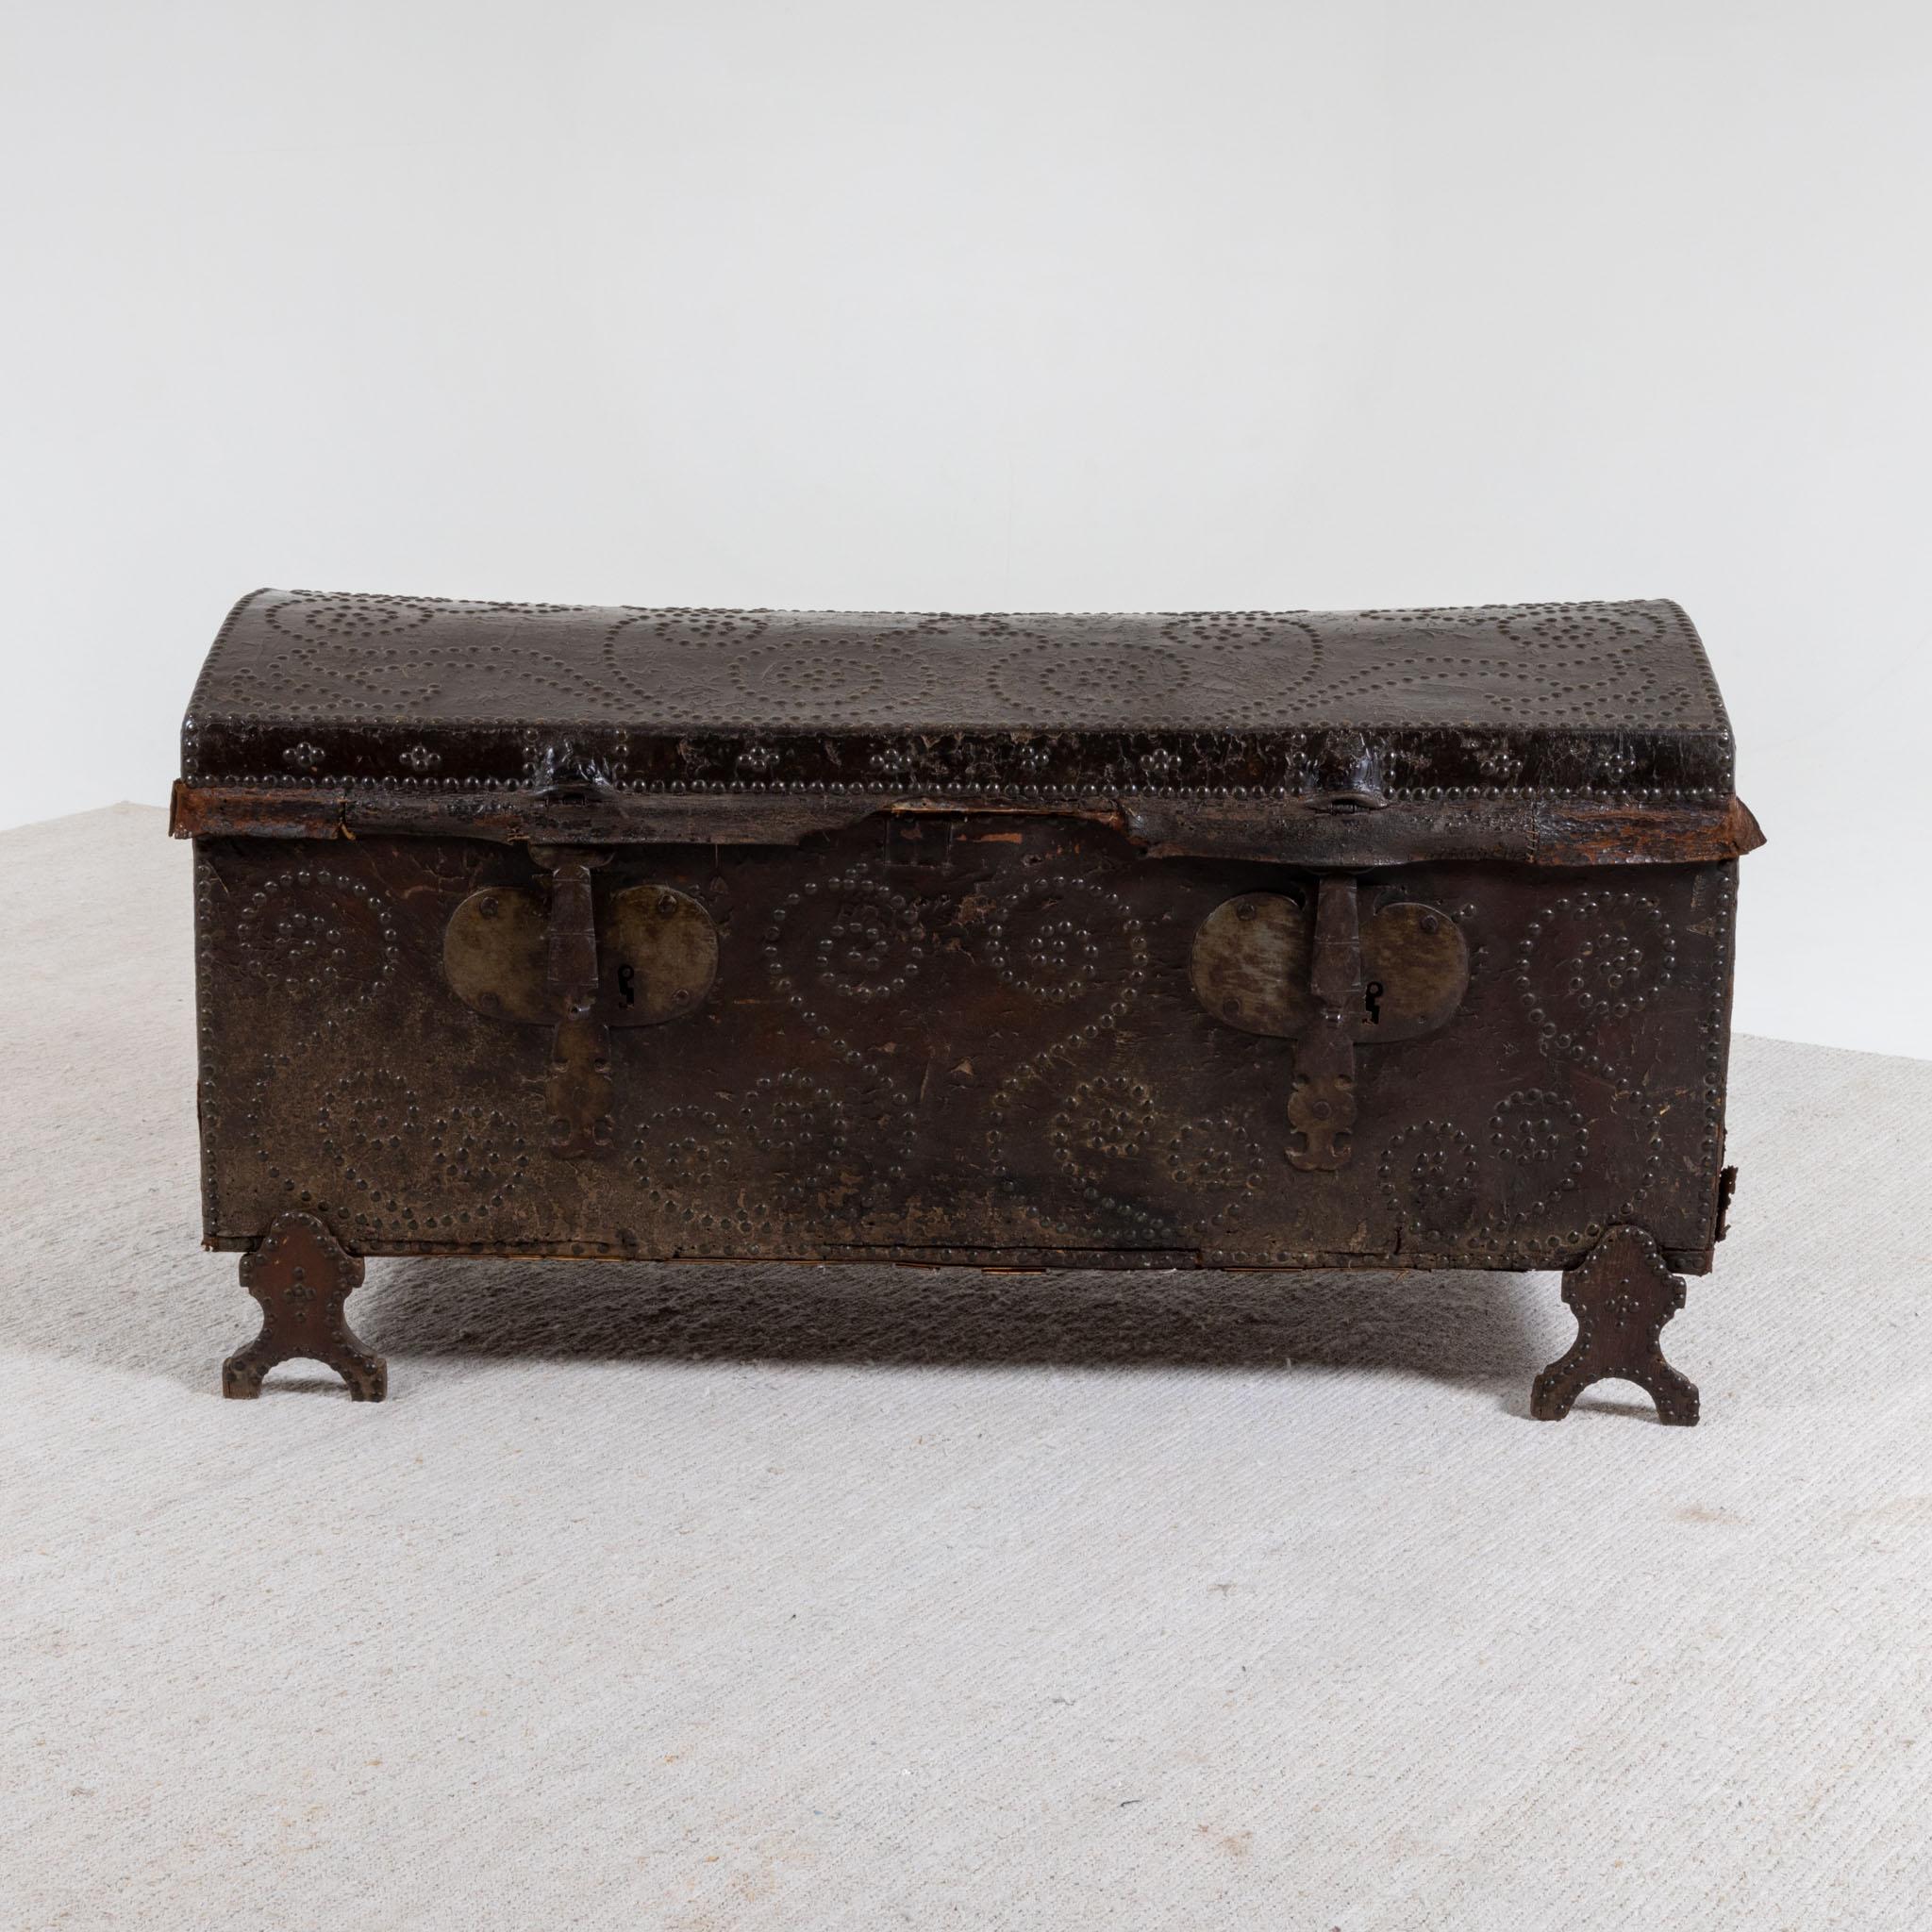 Elongated chest with a domed lid and iron fittings. The wooden chest is covered with dark brown leather and decorated with rivets. The chest stands on forked legs and is lined with fabric inside.